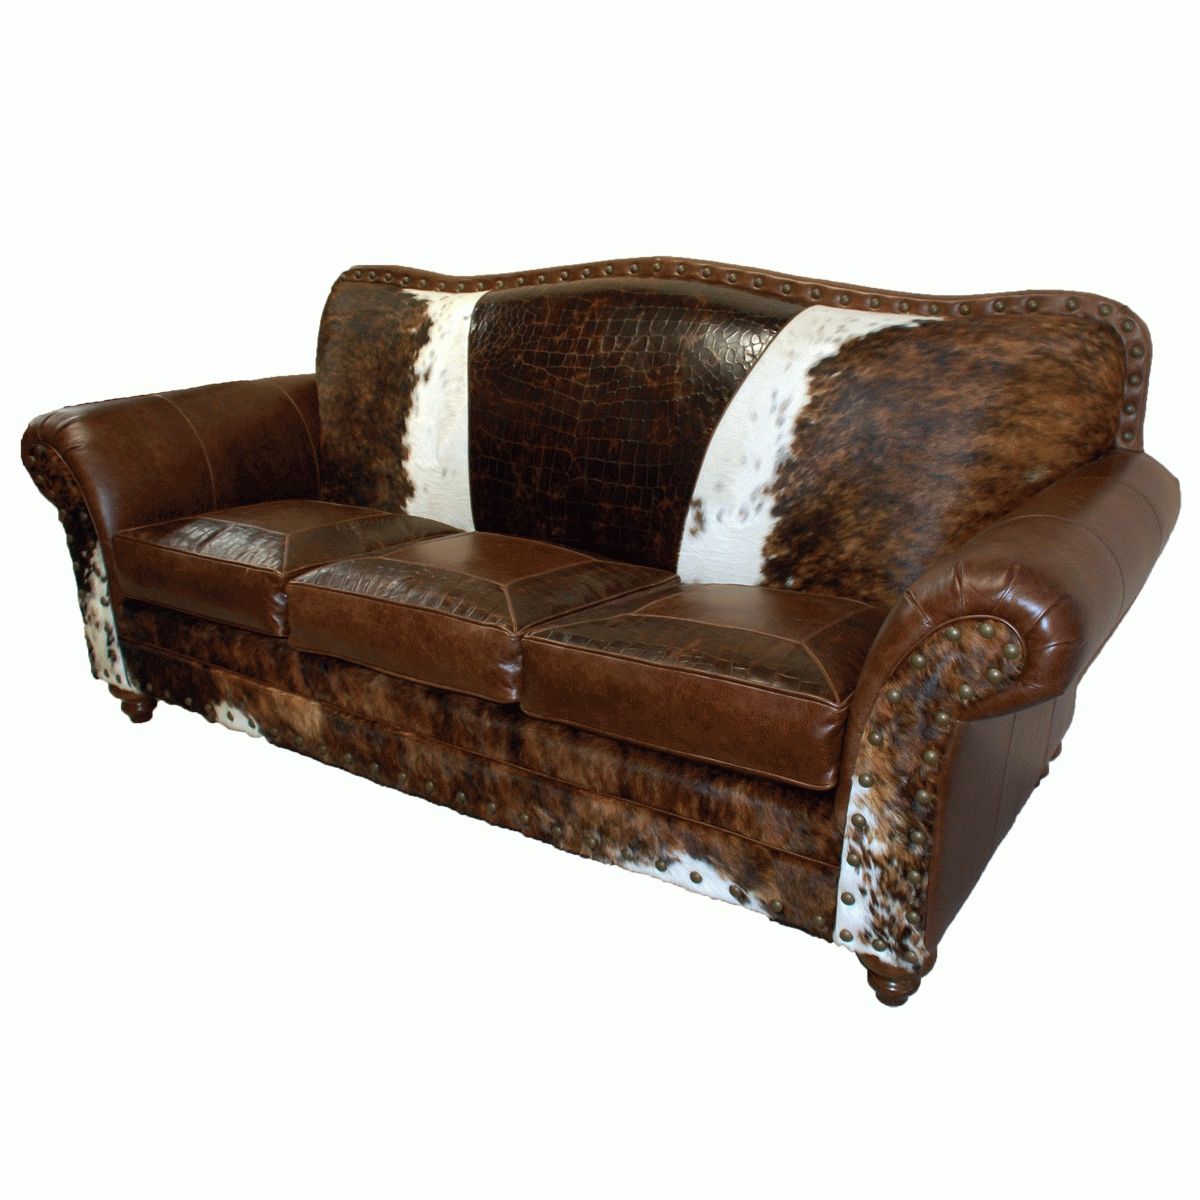 Western Leather Furniture & Cowboy Furnishings From Lones Star Pertaining To Cowhide Sofas (Photo 1 of 15)